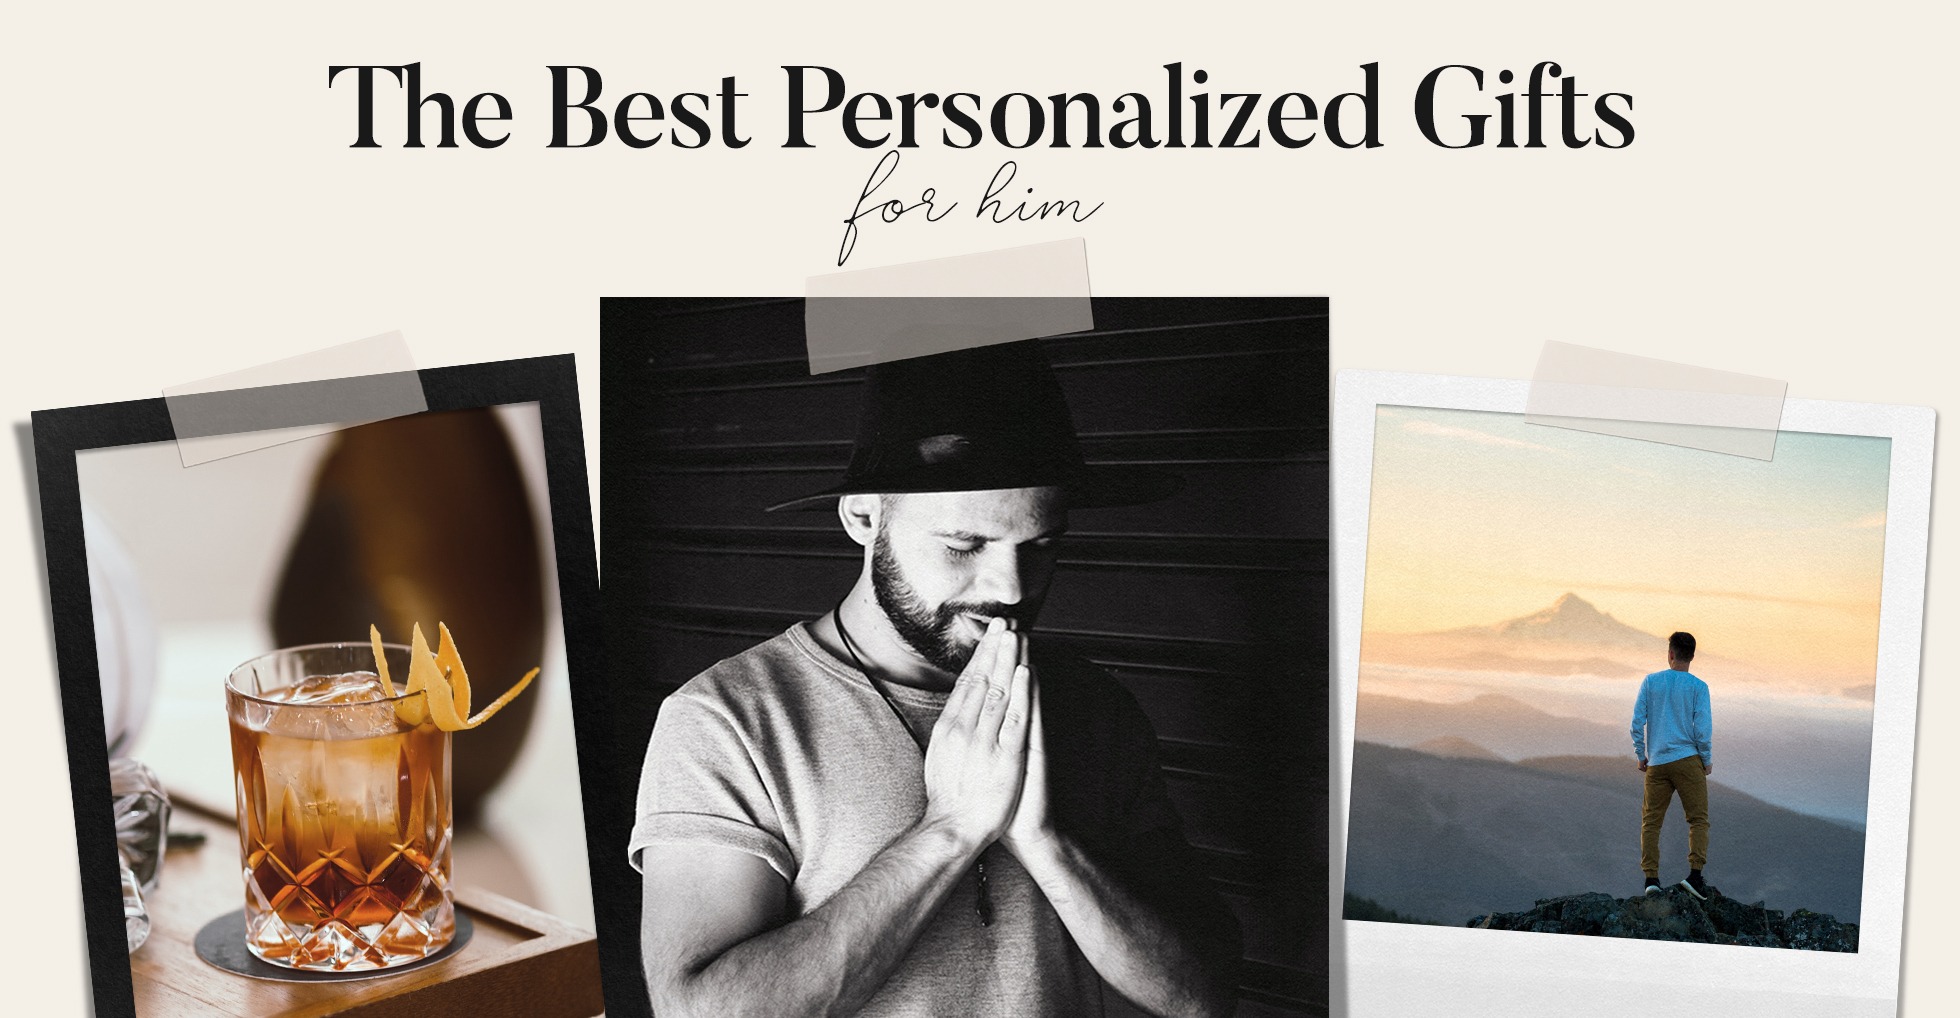 7 Slam-Dunk Personalized Gifts for Him